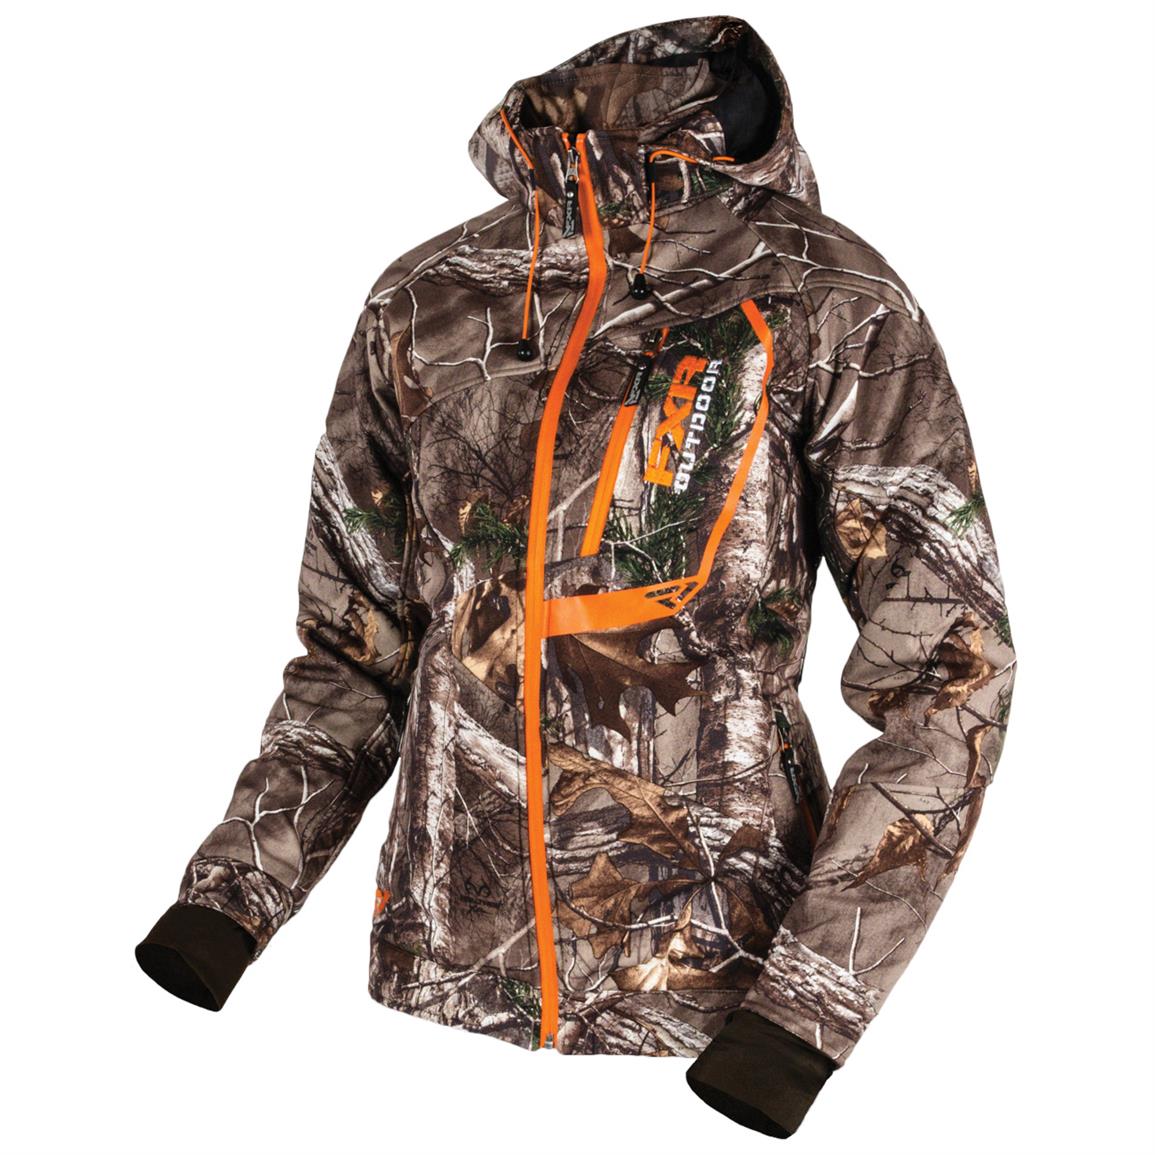 Women's FXR Vertical Pro Waterproof Insulated Realtree Camo Softshell ...